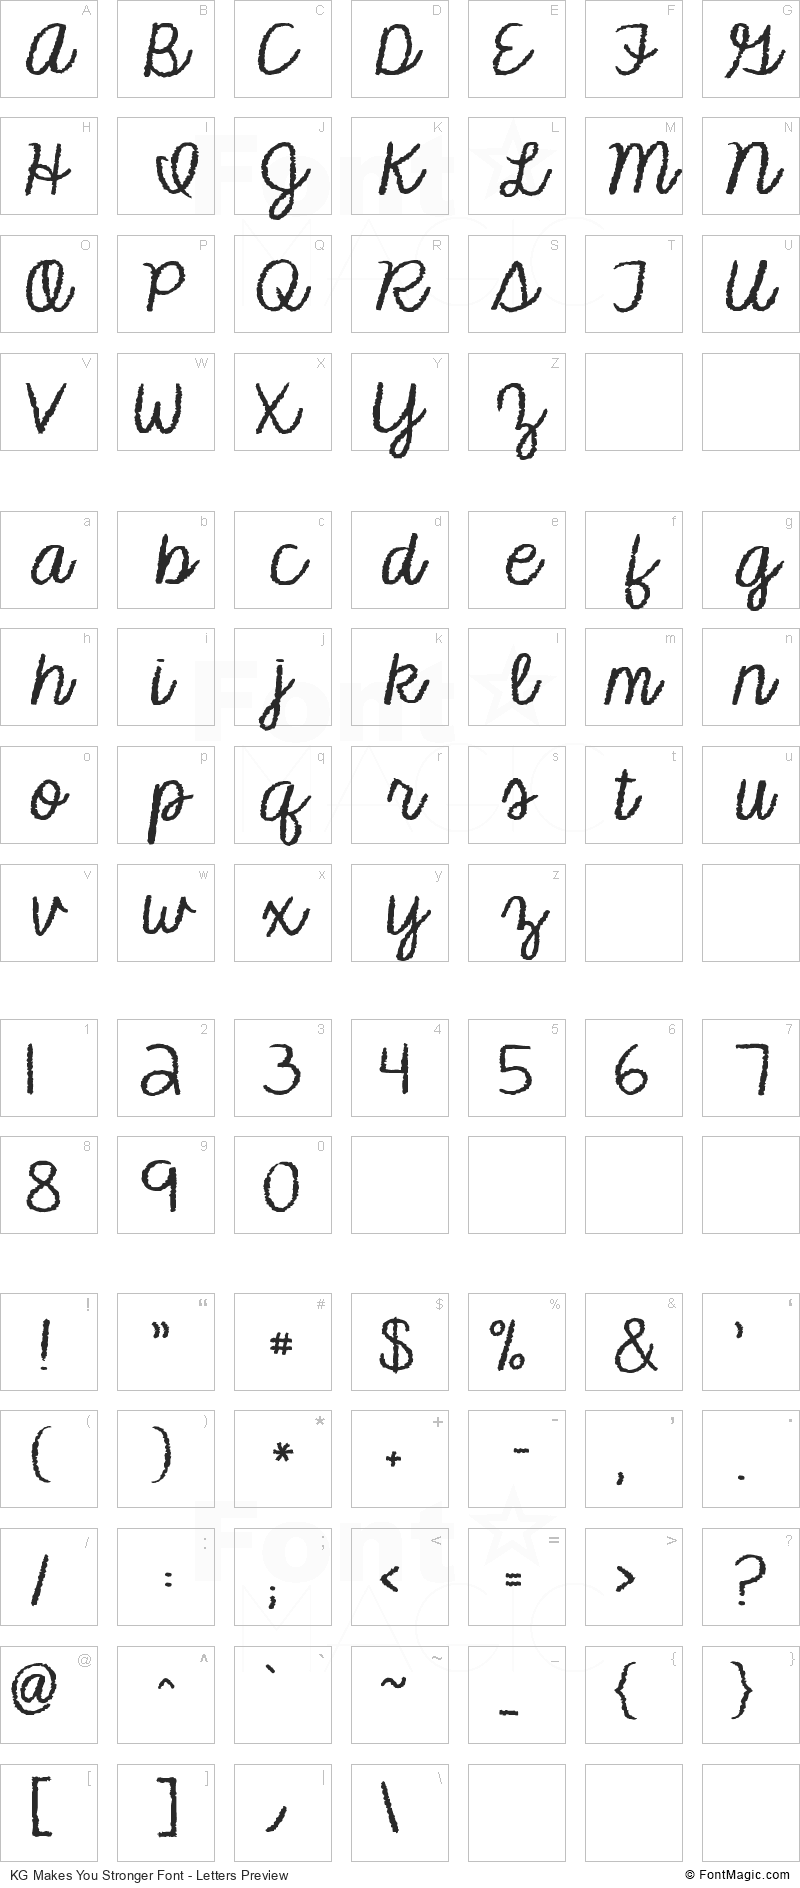 KG Makes You Stronger Font - All Latters Preview Chart